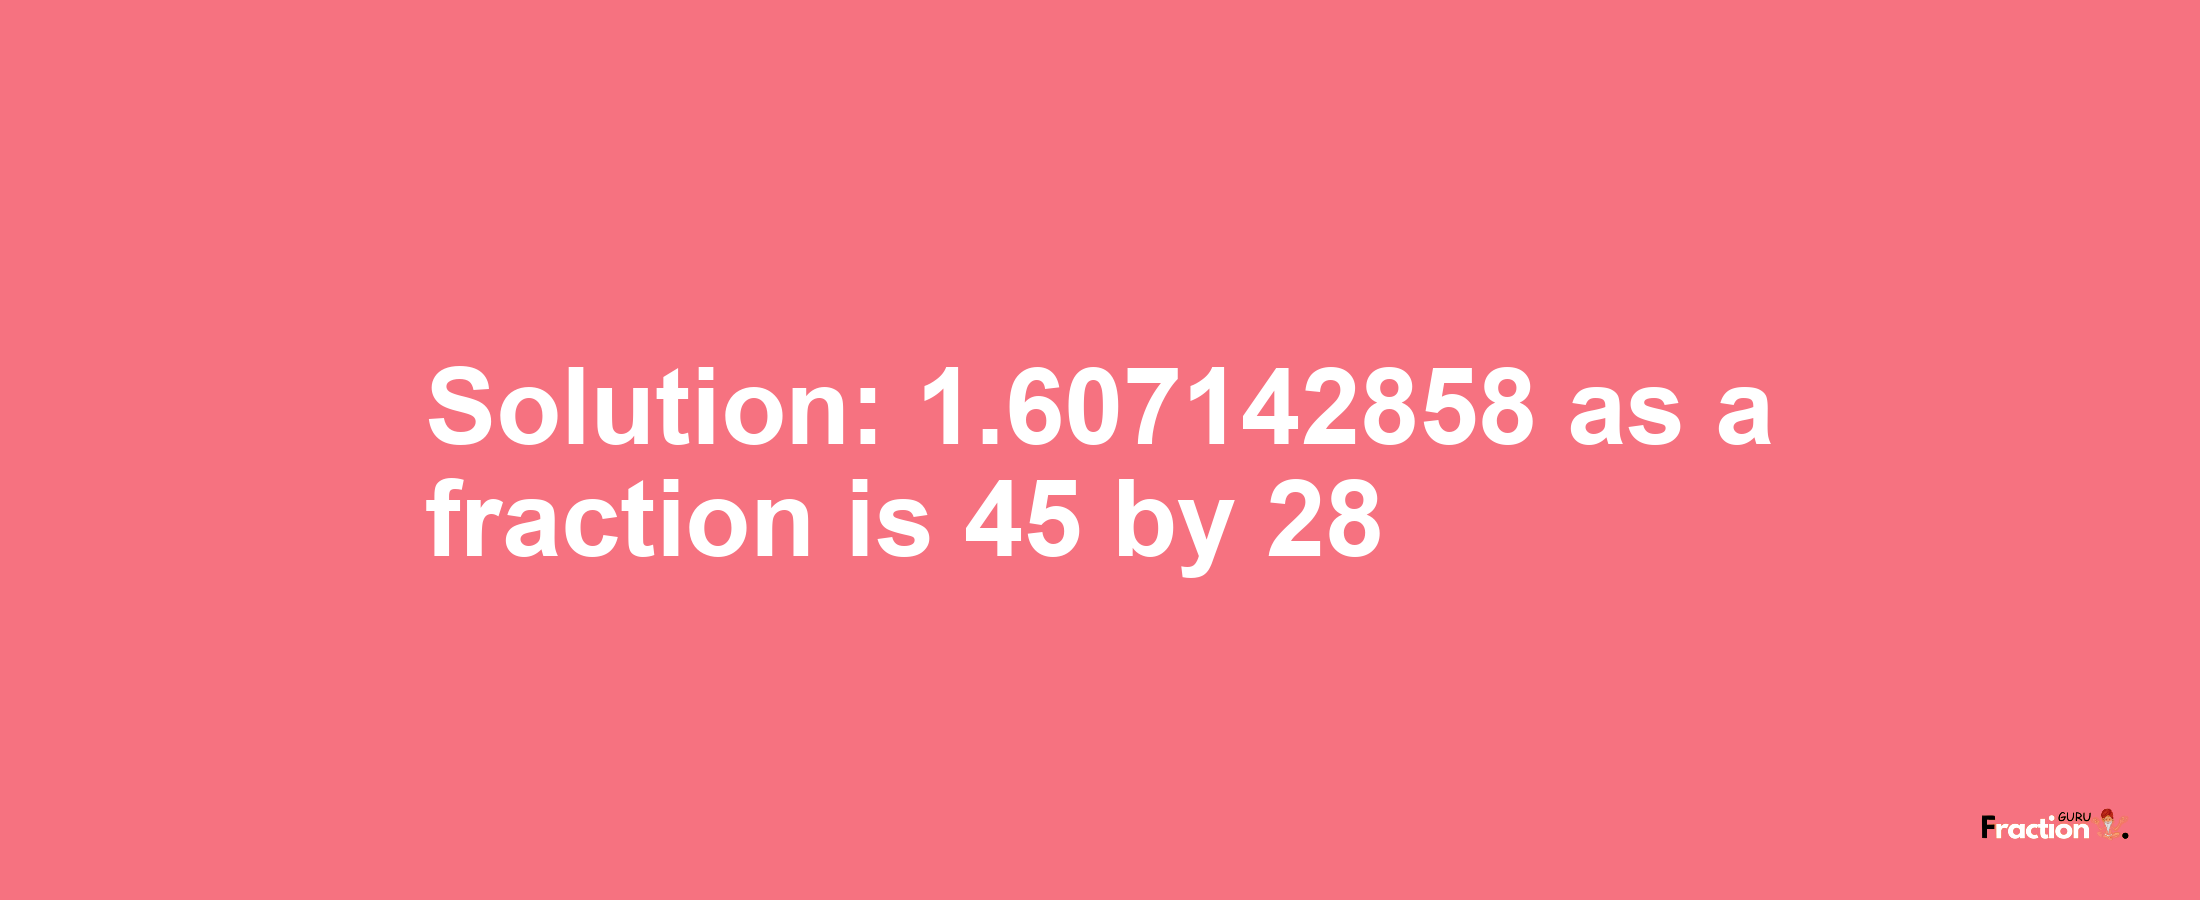 Solution:1.607142858 as a fraction is 45/28